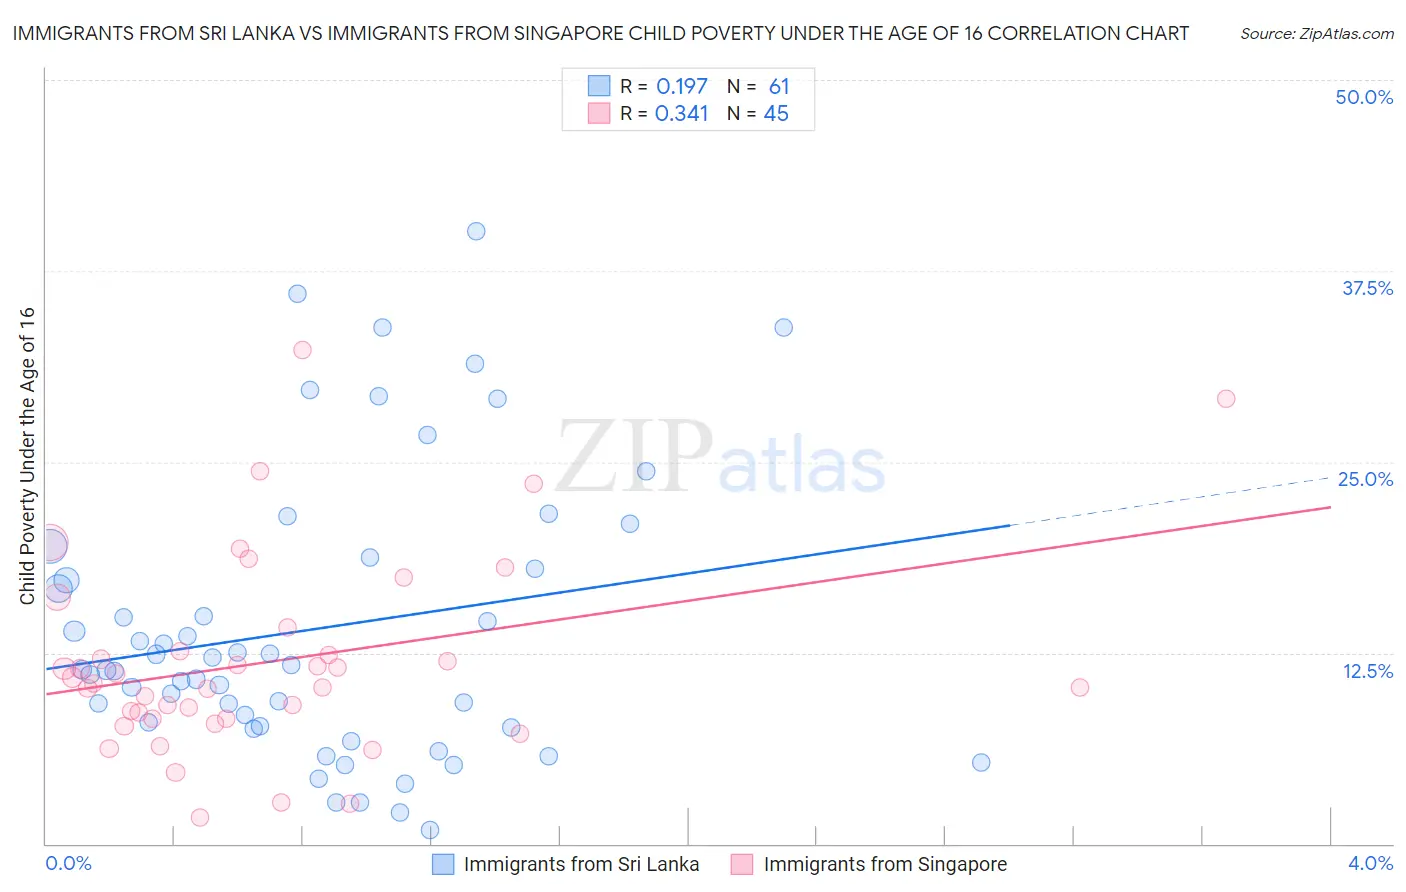 Immigrants from Sri Lanka vs Immigrants from Singapore Child Poverty Under the Age of 16